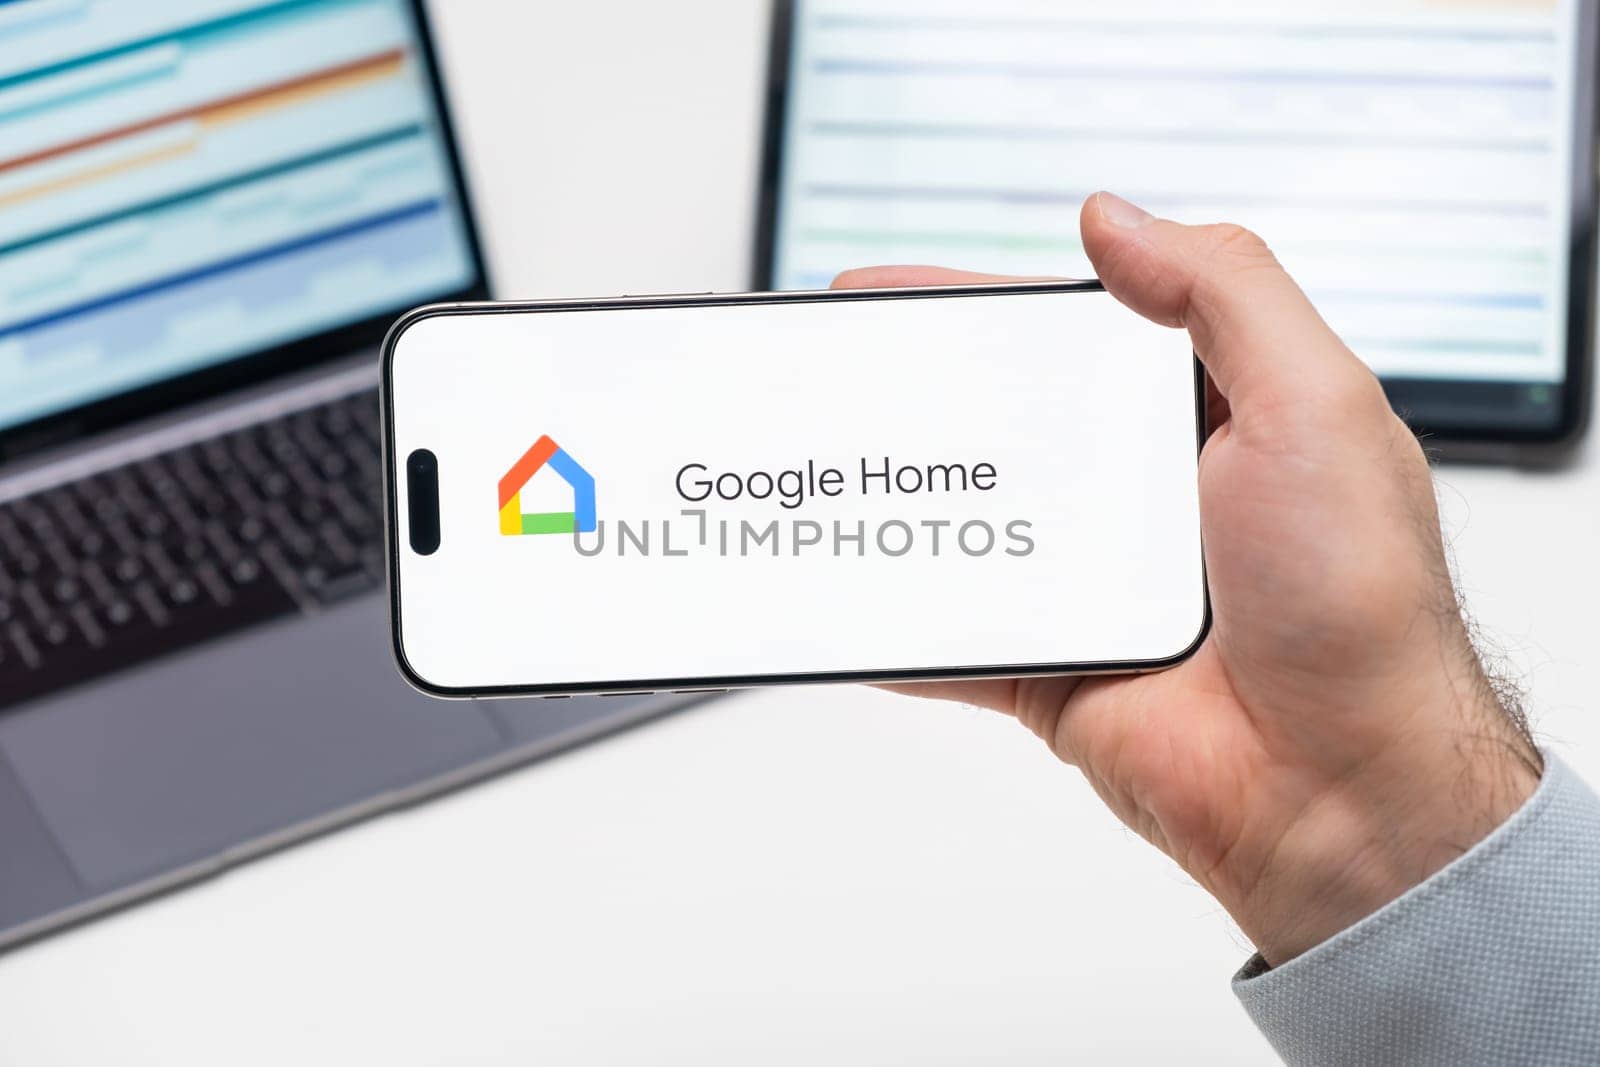 Google home application logo on the screen of smart phone in mans hand by vladimka